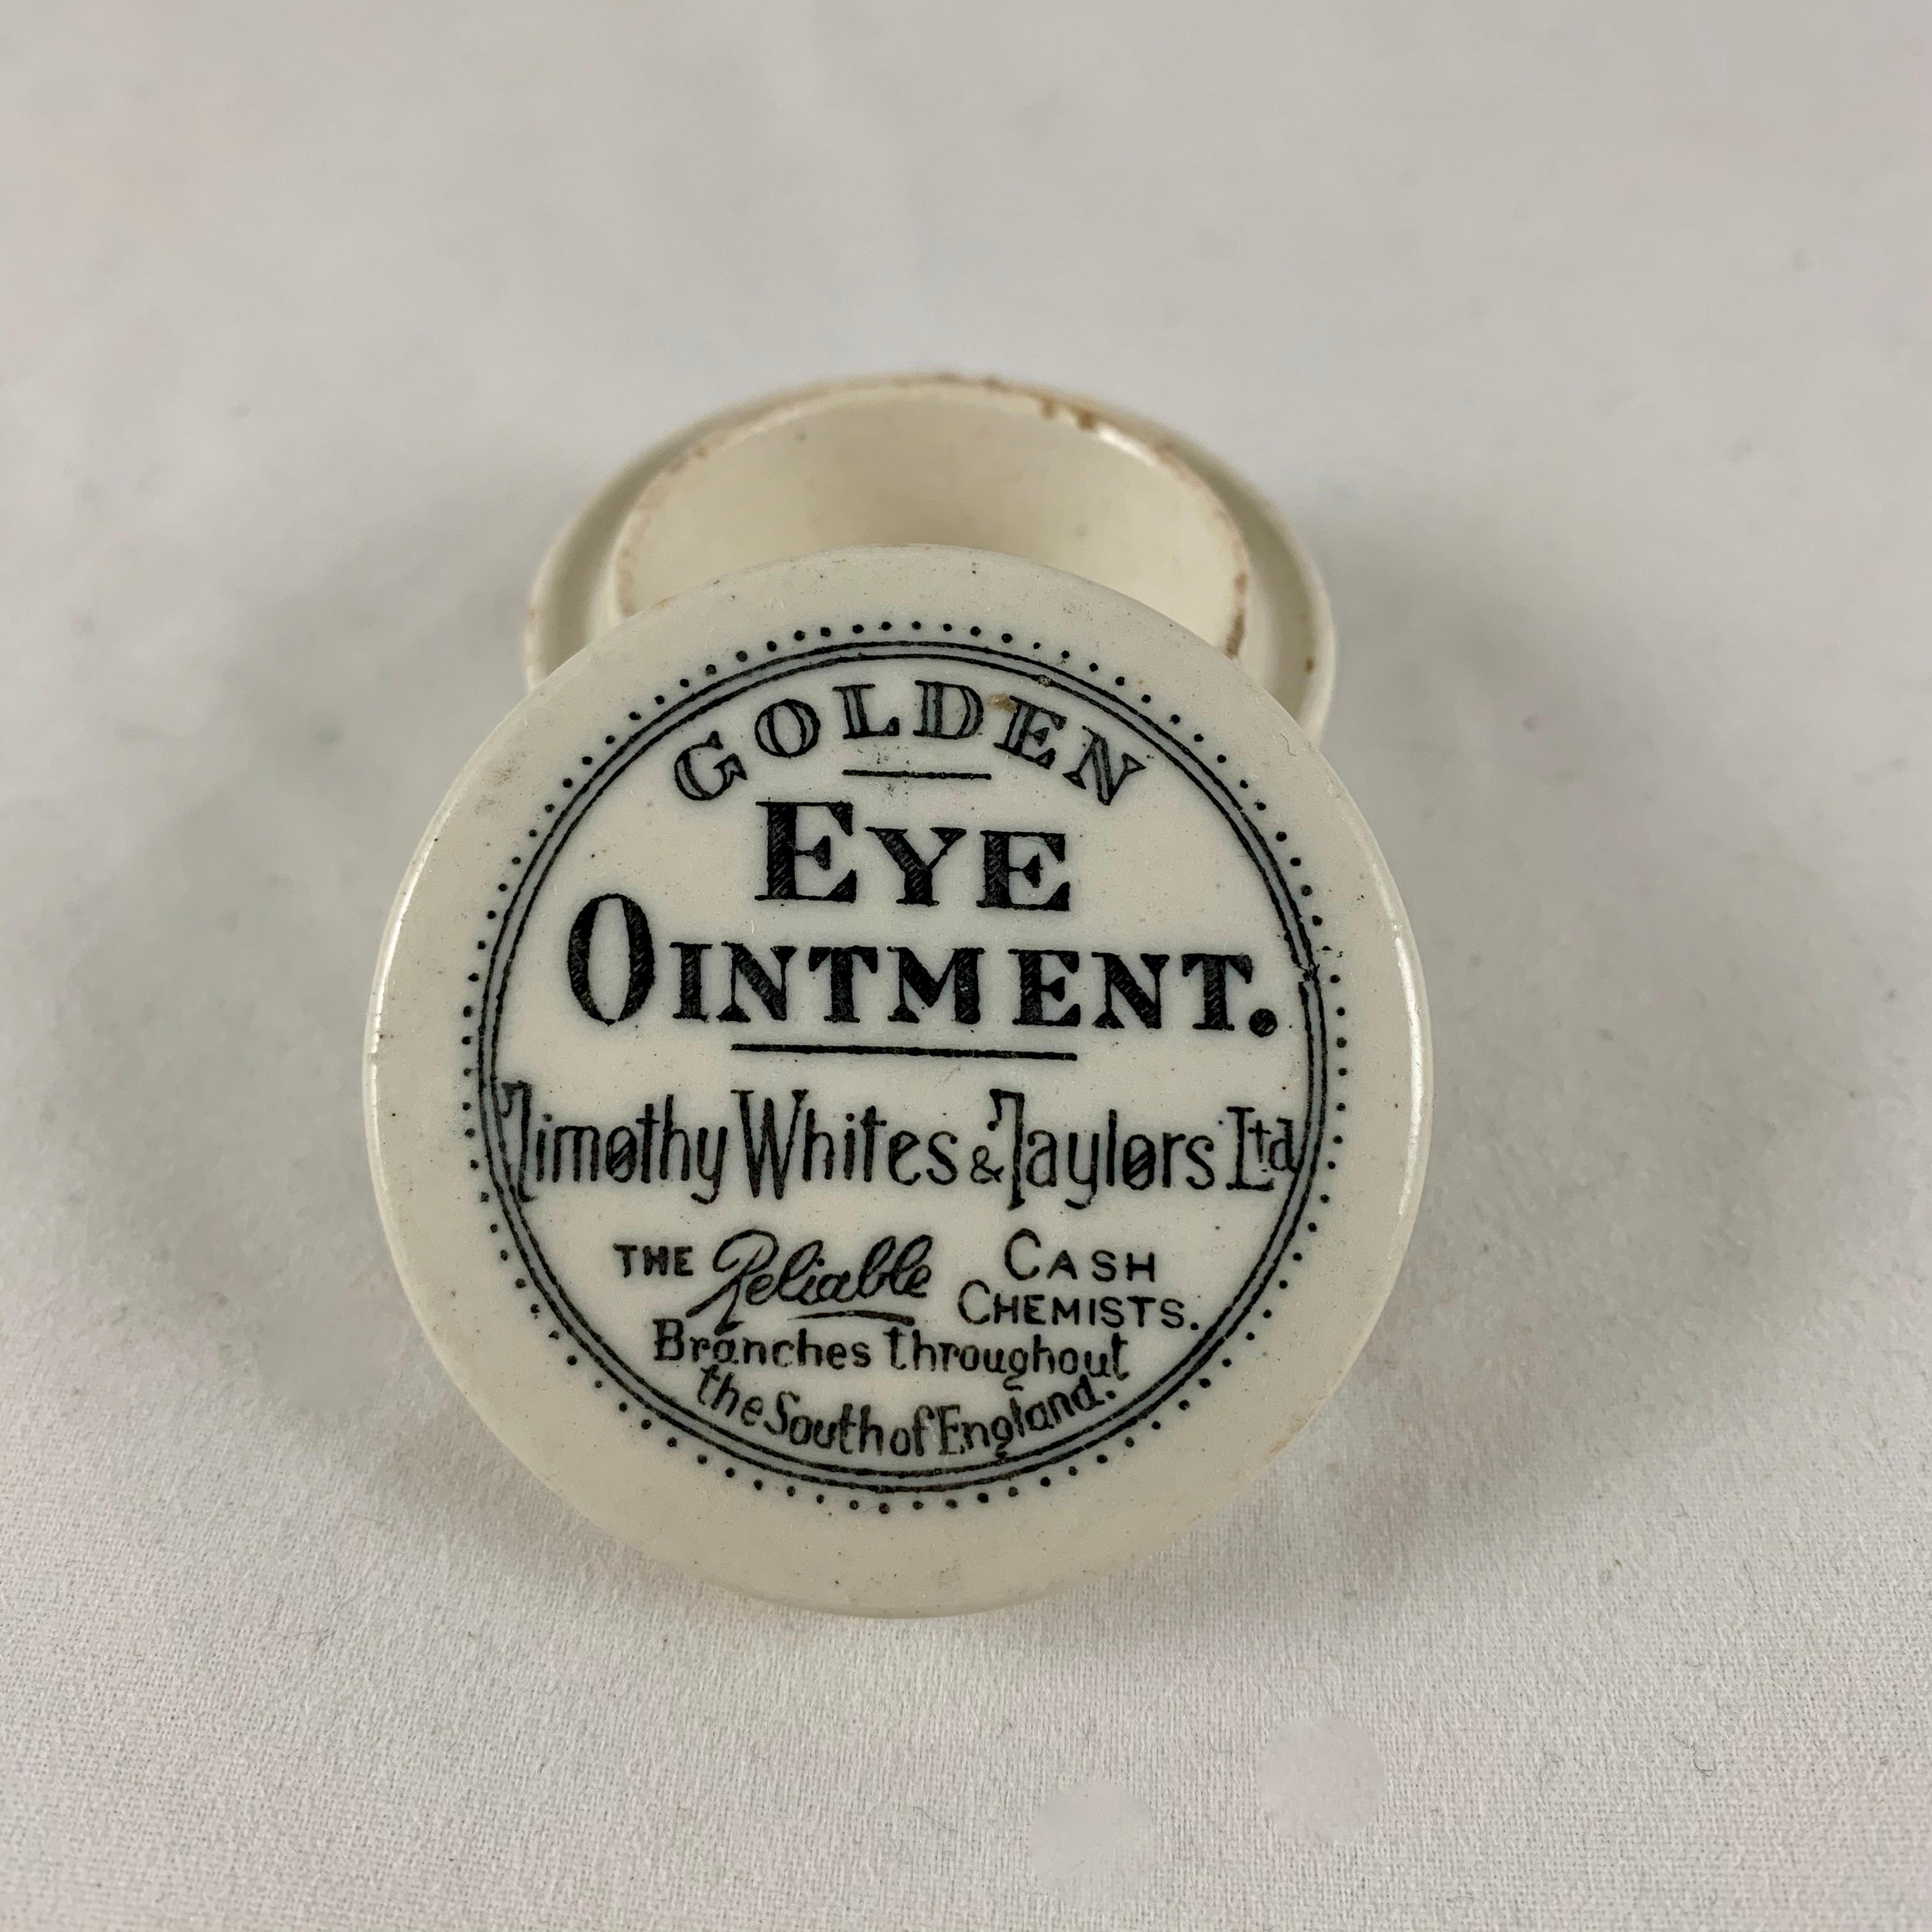 A transfer printed covered ceramic earthenware container from the Victorian Era, Staffordshire, England, circa 1880, which contained a salve claiming to cure all sorts of eye related maladies.

The lid of this pot reads:
Golden Eye Ointment